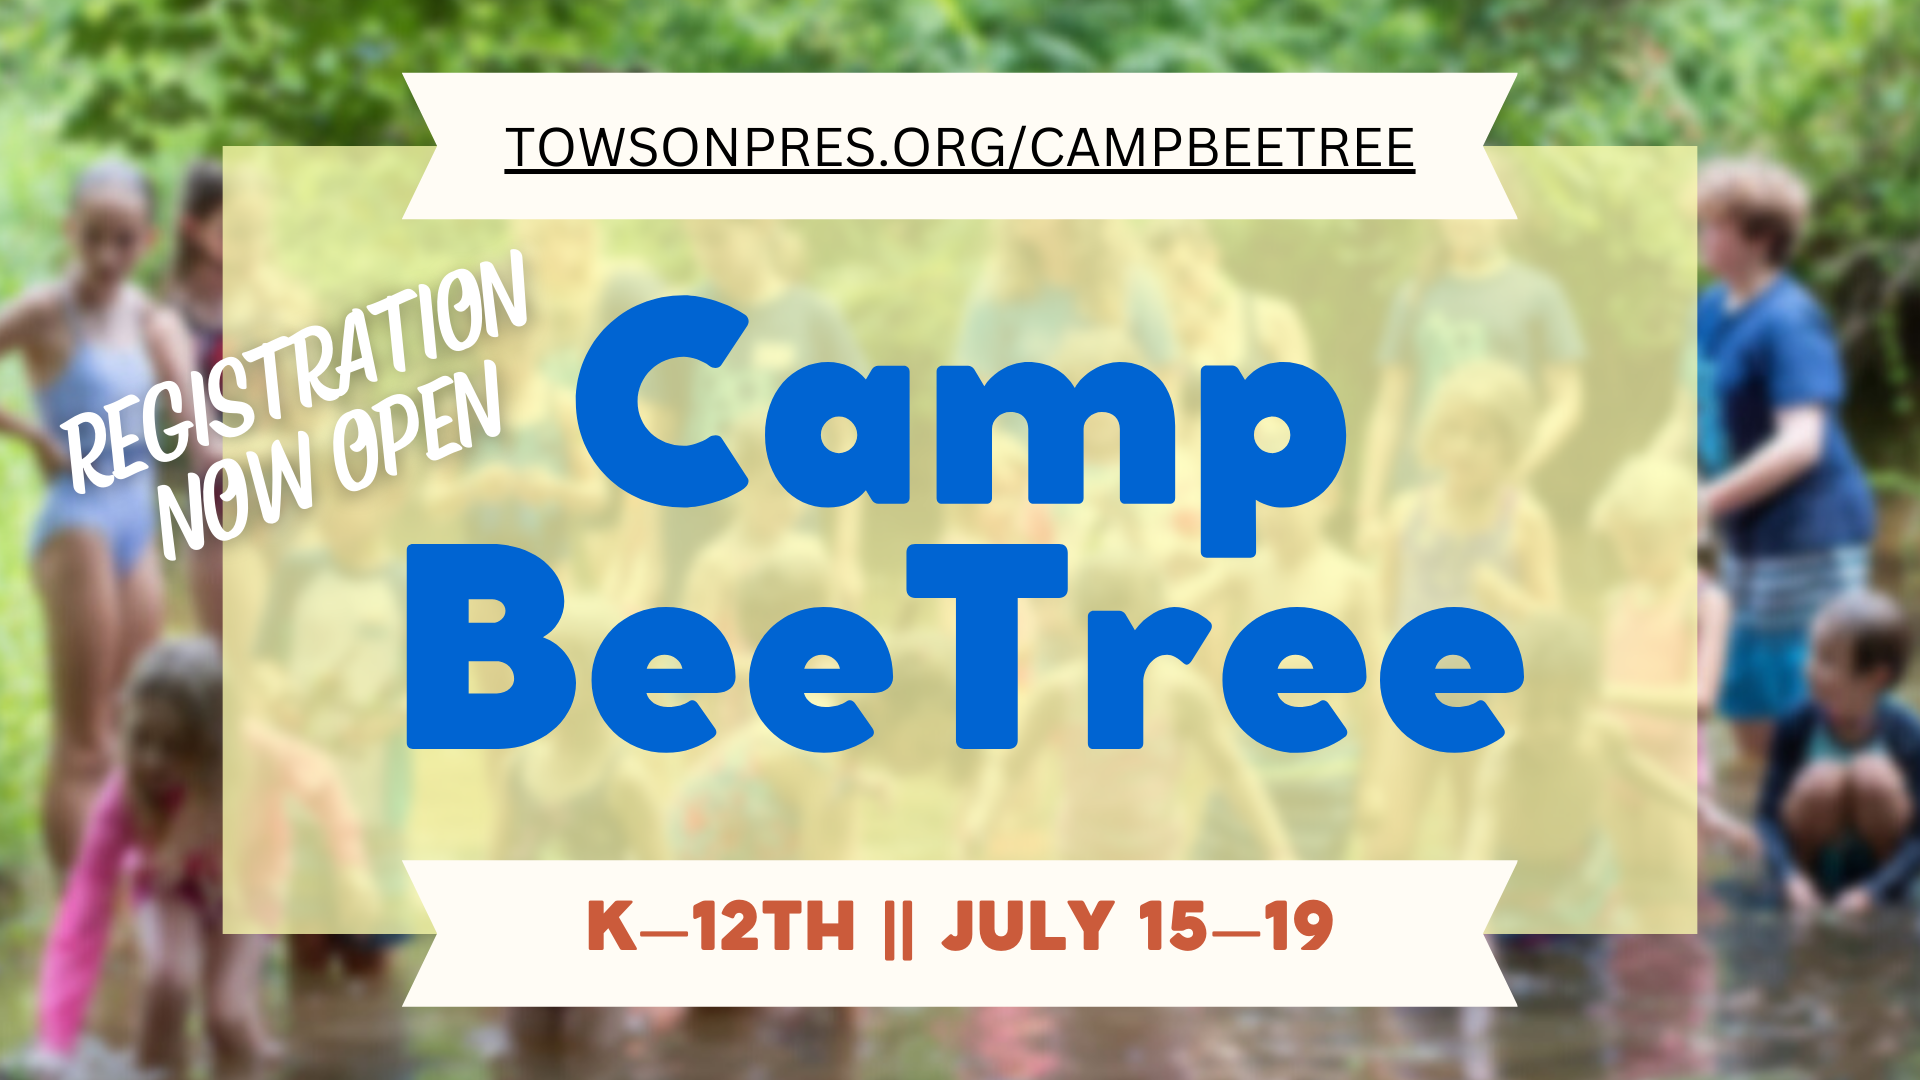 Camp BeeTree graphic. Reads Registration now open. Camp BeeTree K-12th | July 15-19. Towsonpres.org/campbeetree